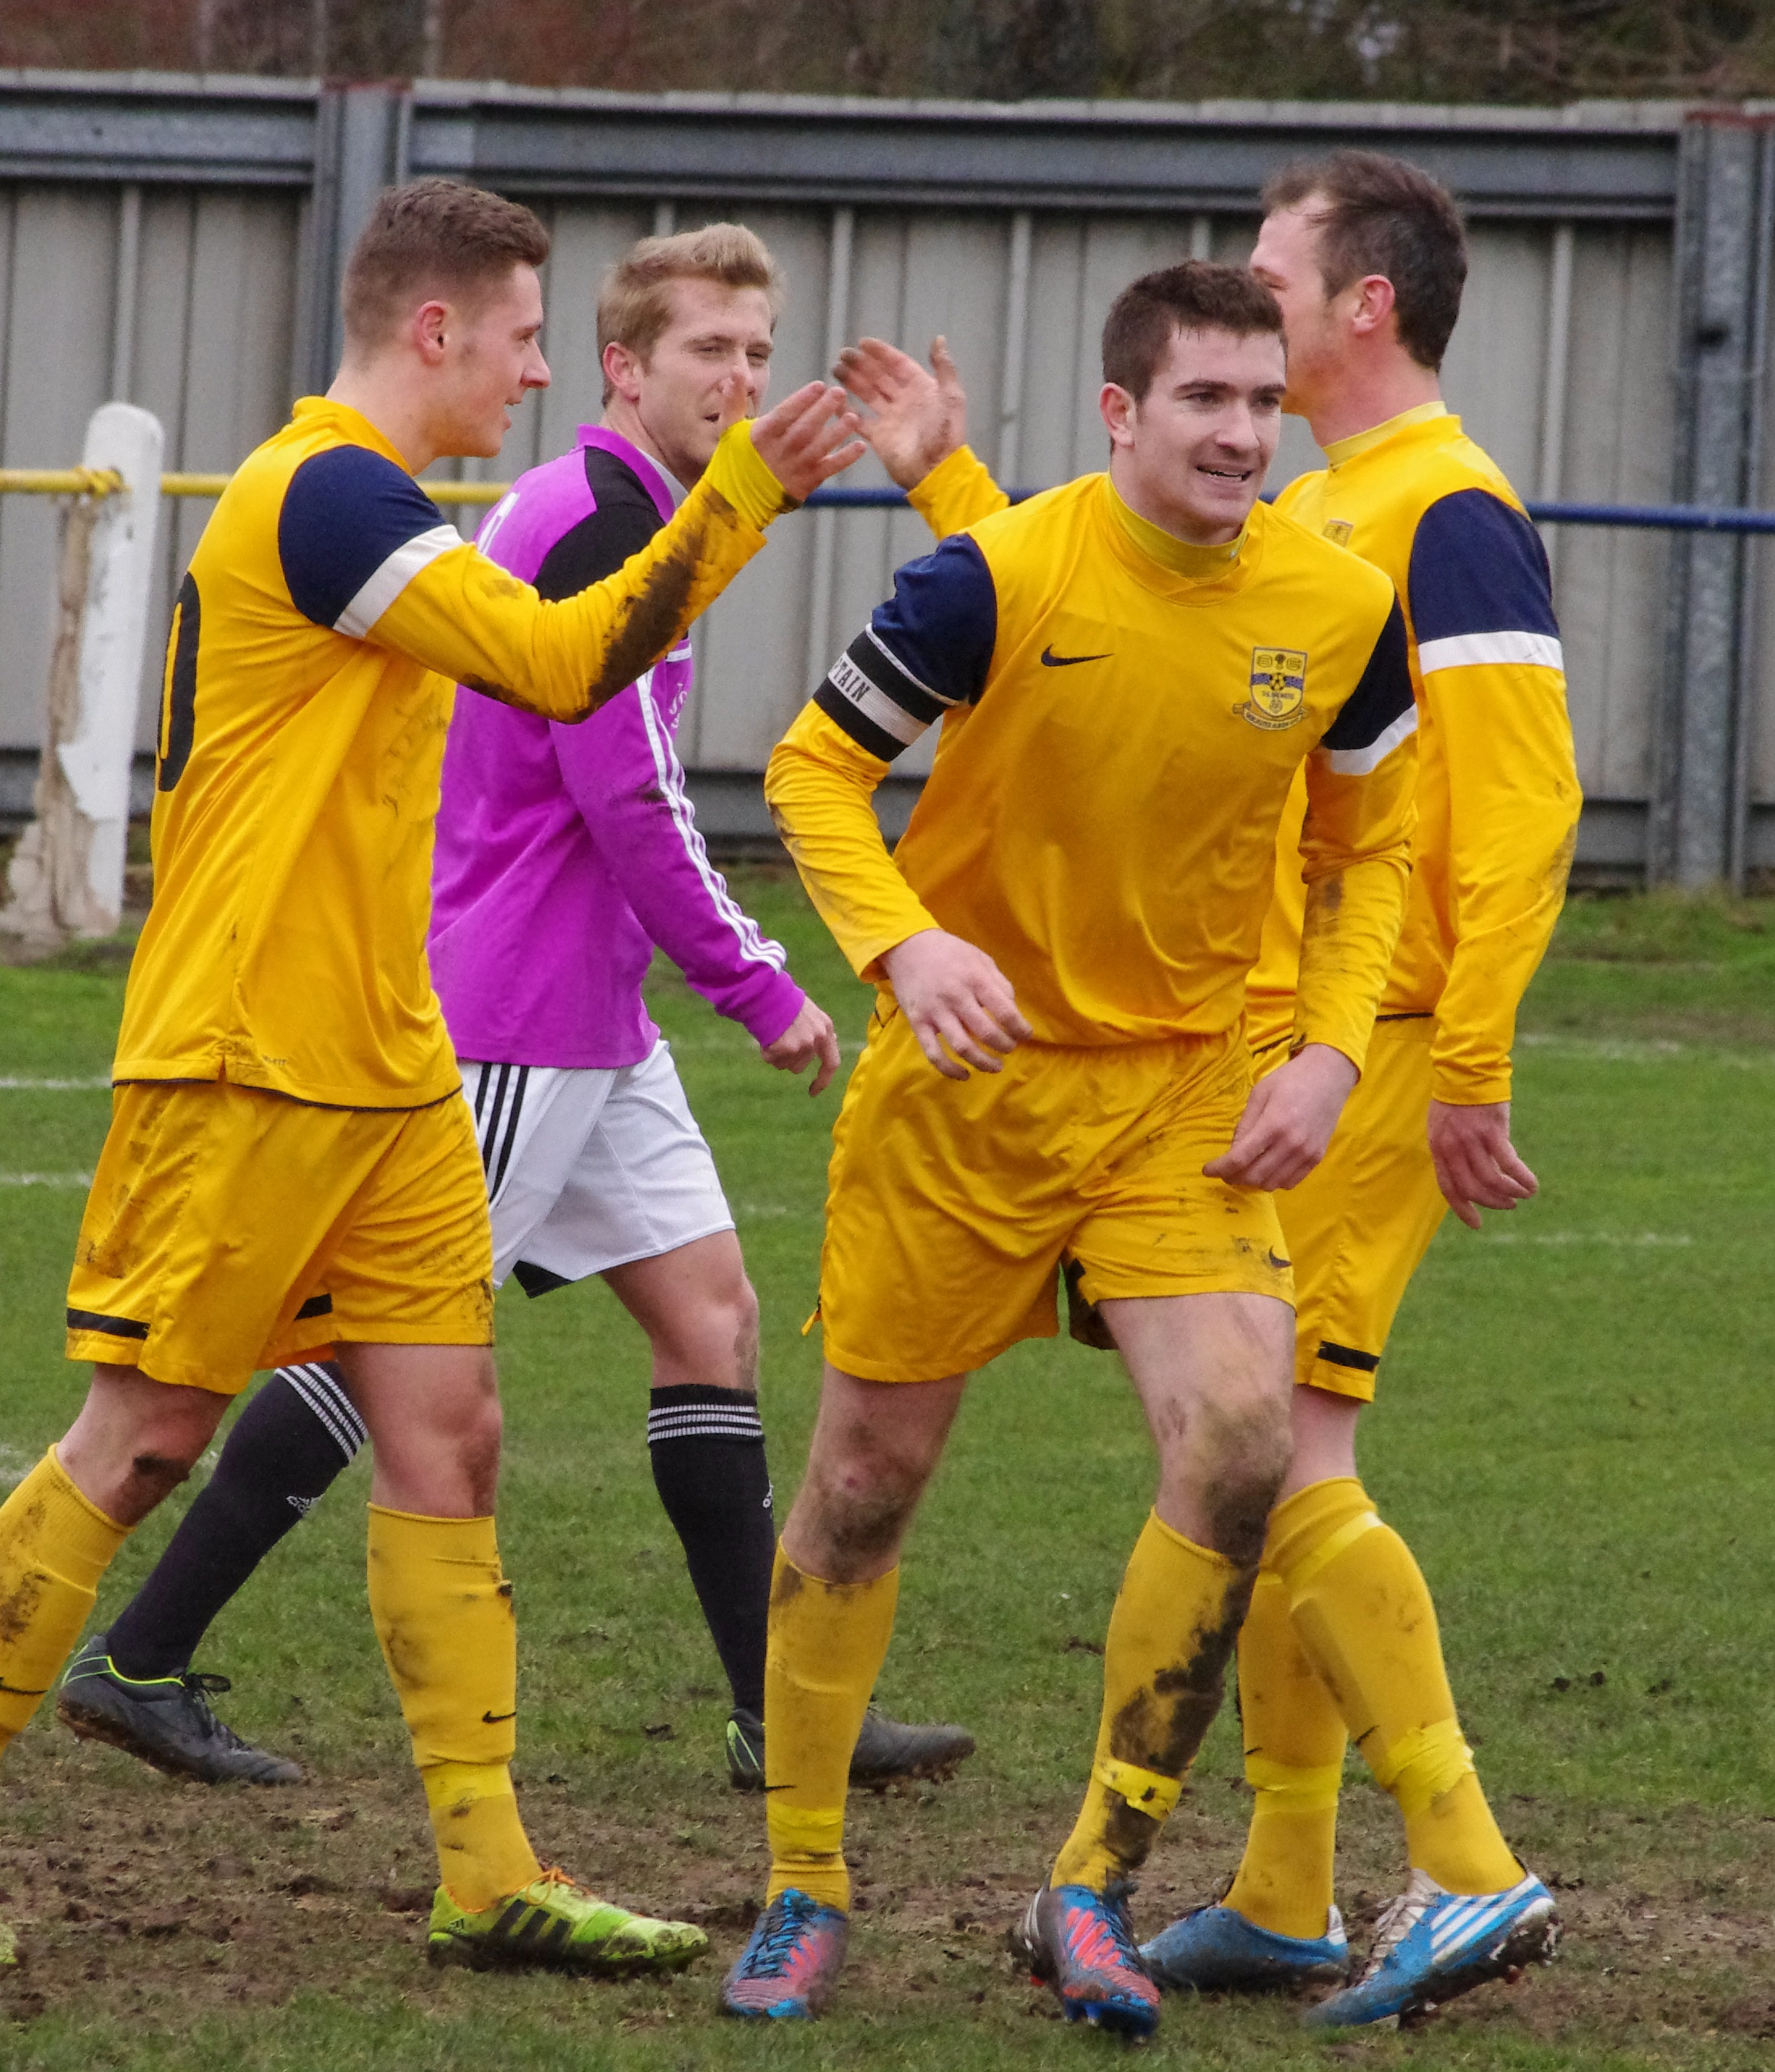 A fixture extension would give two of Tadcaster's title rivals an unfair advantage